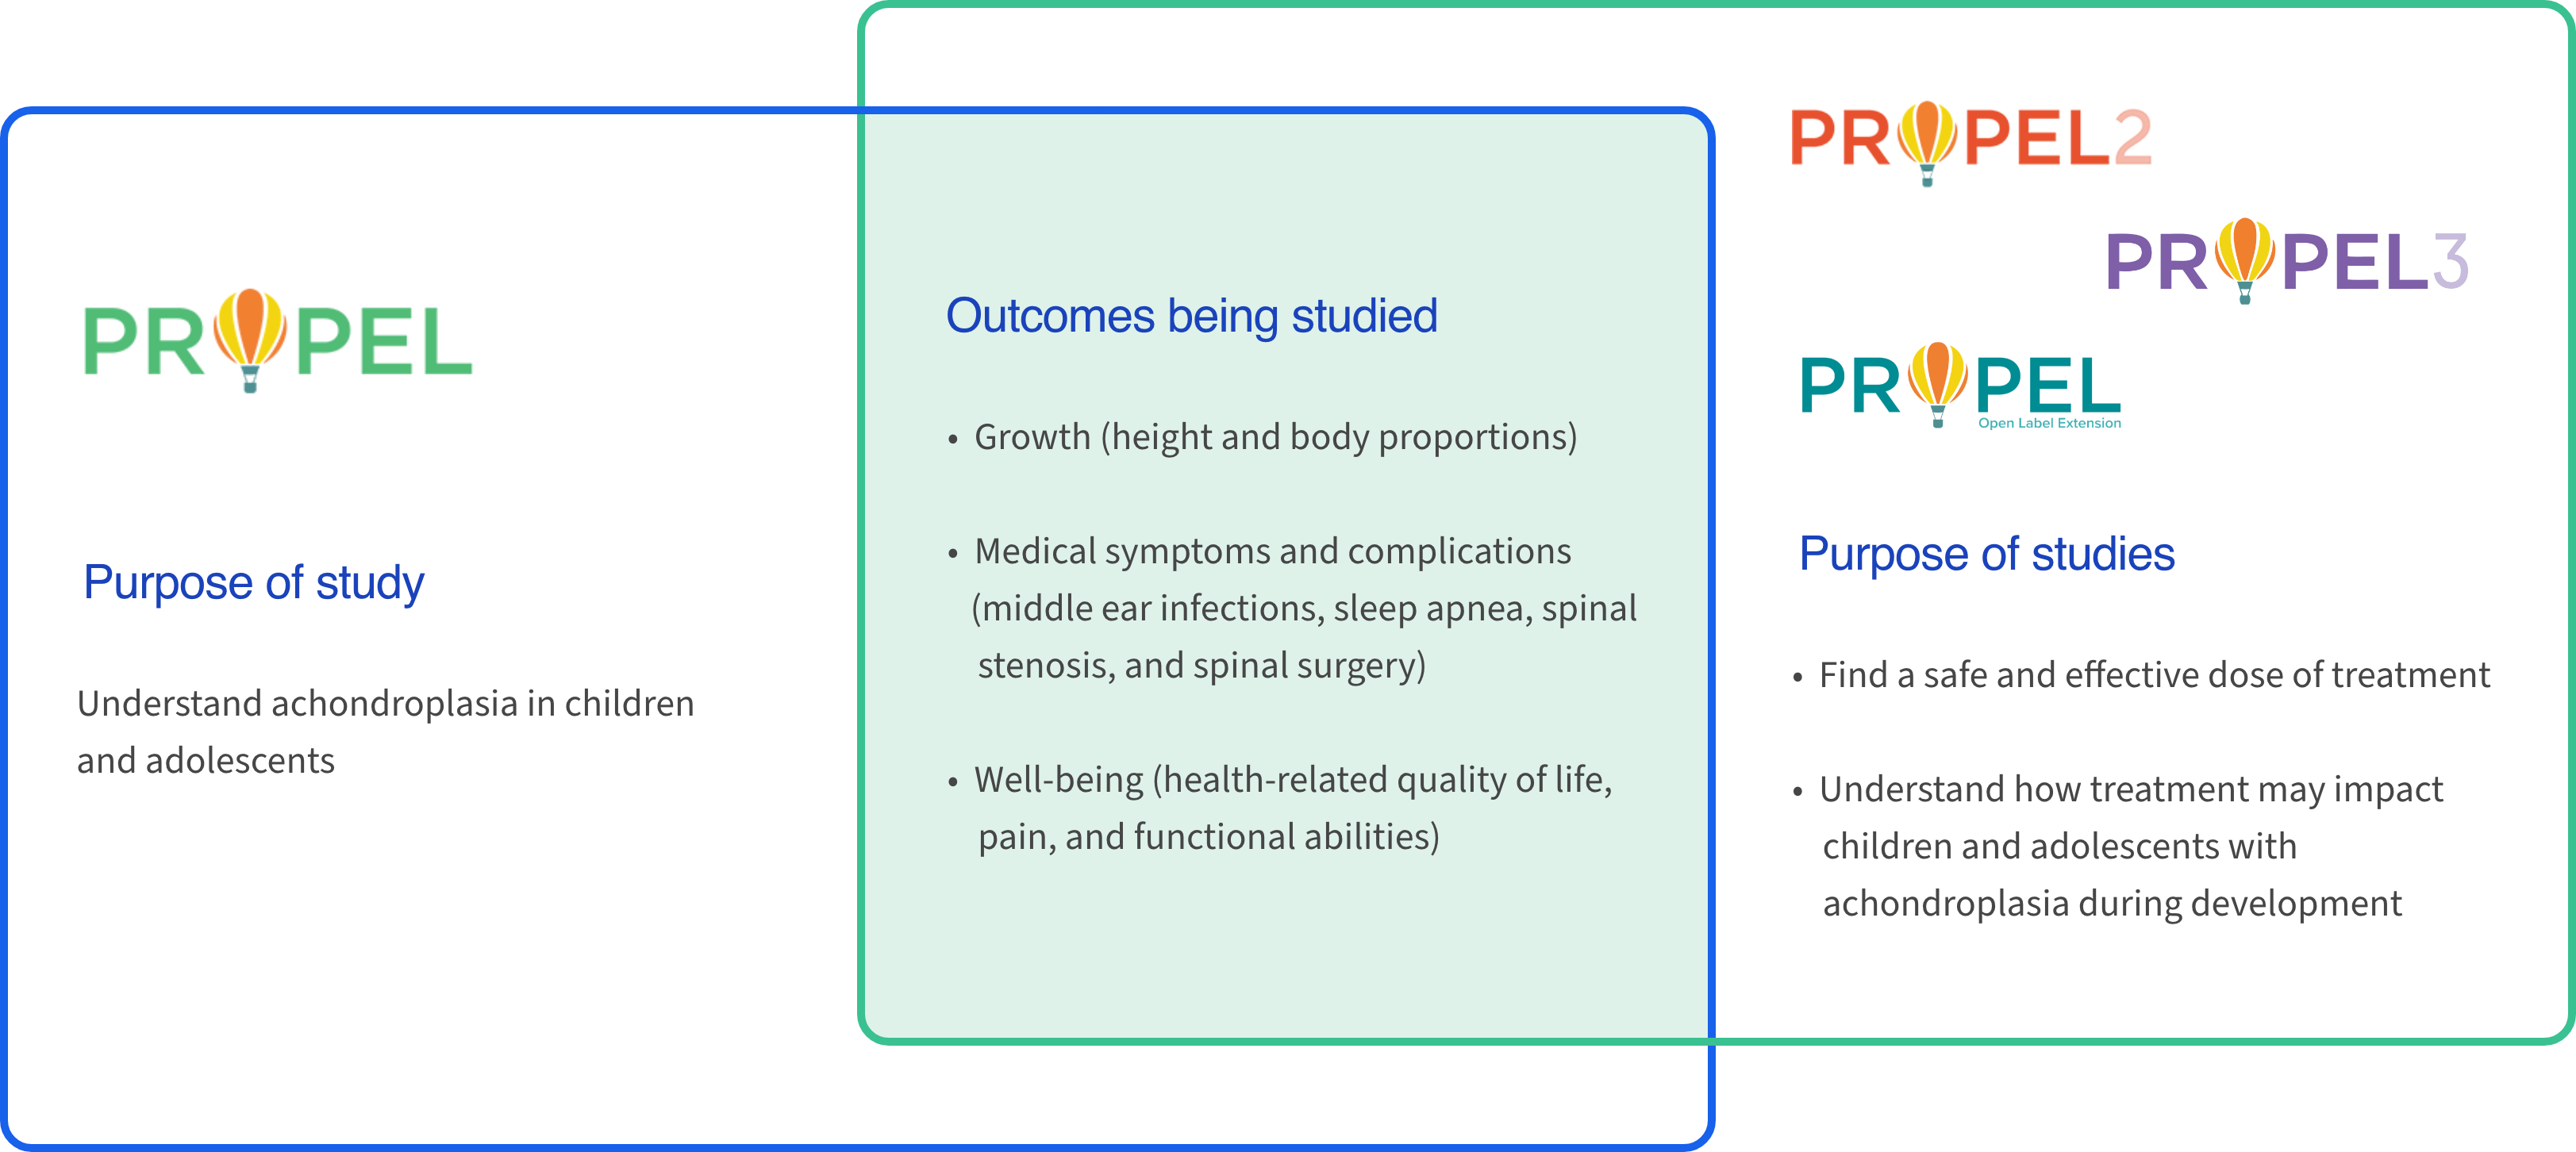 Infographic presenting Propel clinical studies. The left side states that the purpose of the study is to understand achondroplasia in children and adolescents. The middle section lists the outcomes being studied, such as growth (height and body proportions), medical symptoms and complications (middle ear infections, sleep apnea, spinal stenosis, and spinal surgery), and well-being (health-related quality of life, pain, and functional abilities). The right side highlights the purpose of studies: to find a safe and effective dose of treatment and understand how treatment may impact children and adolescents with achondroplasia during development.